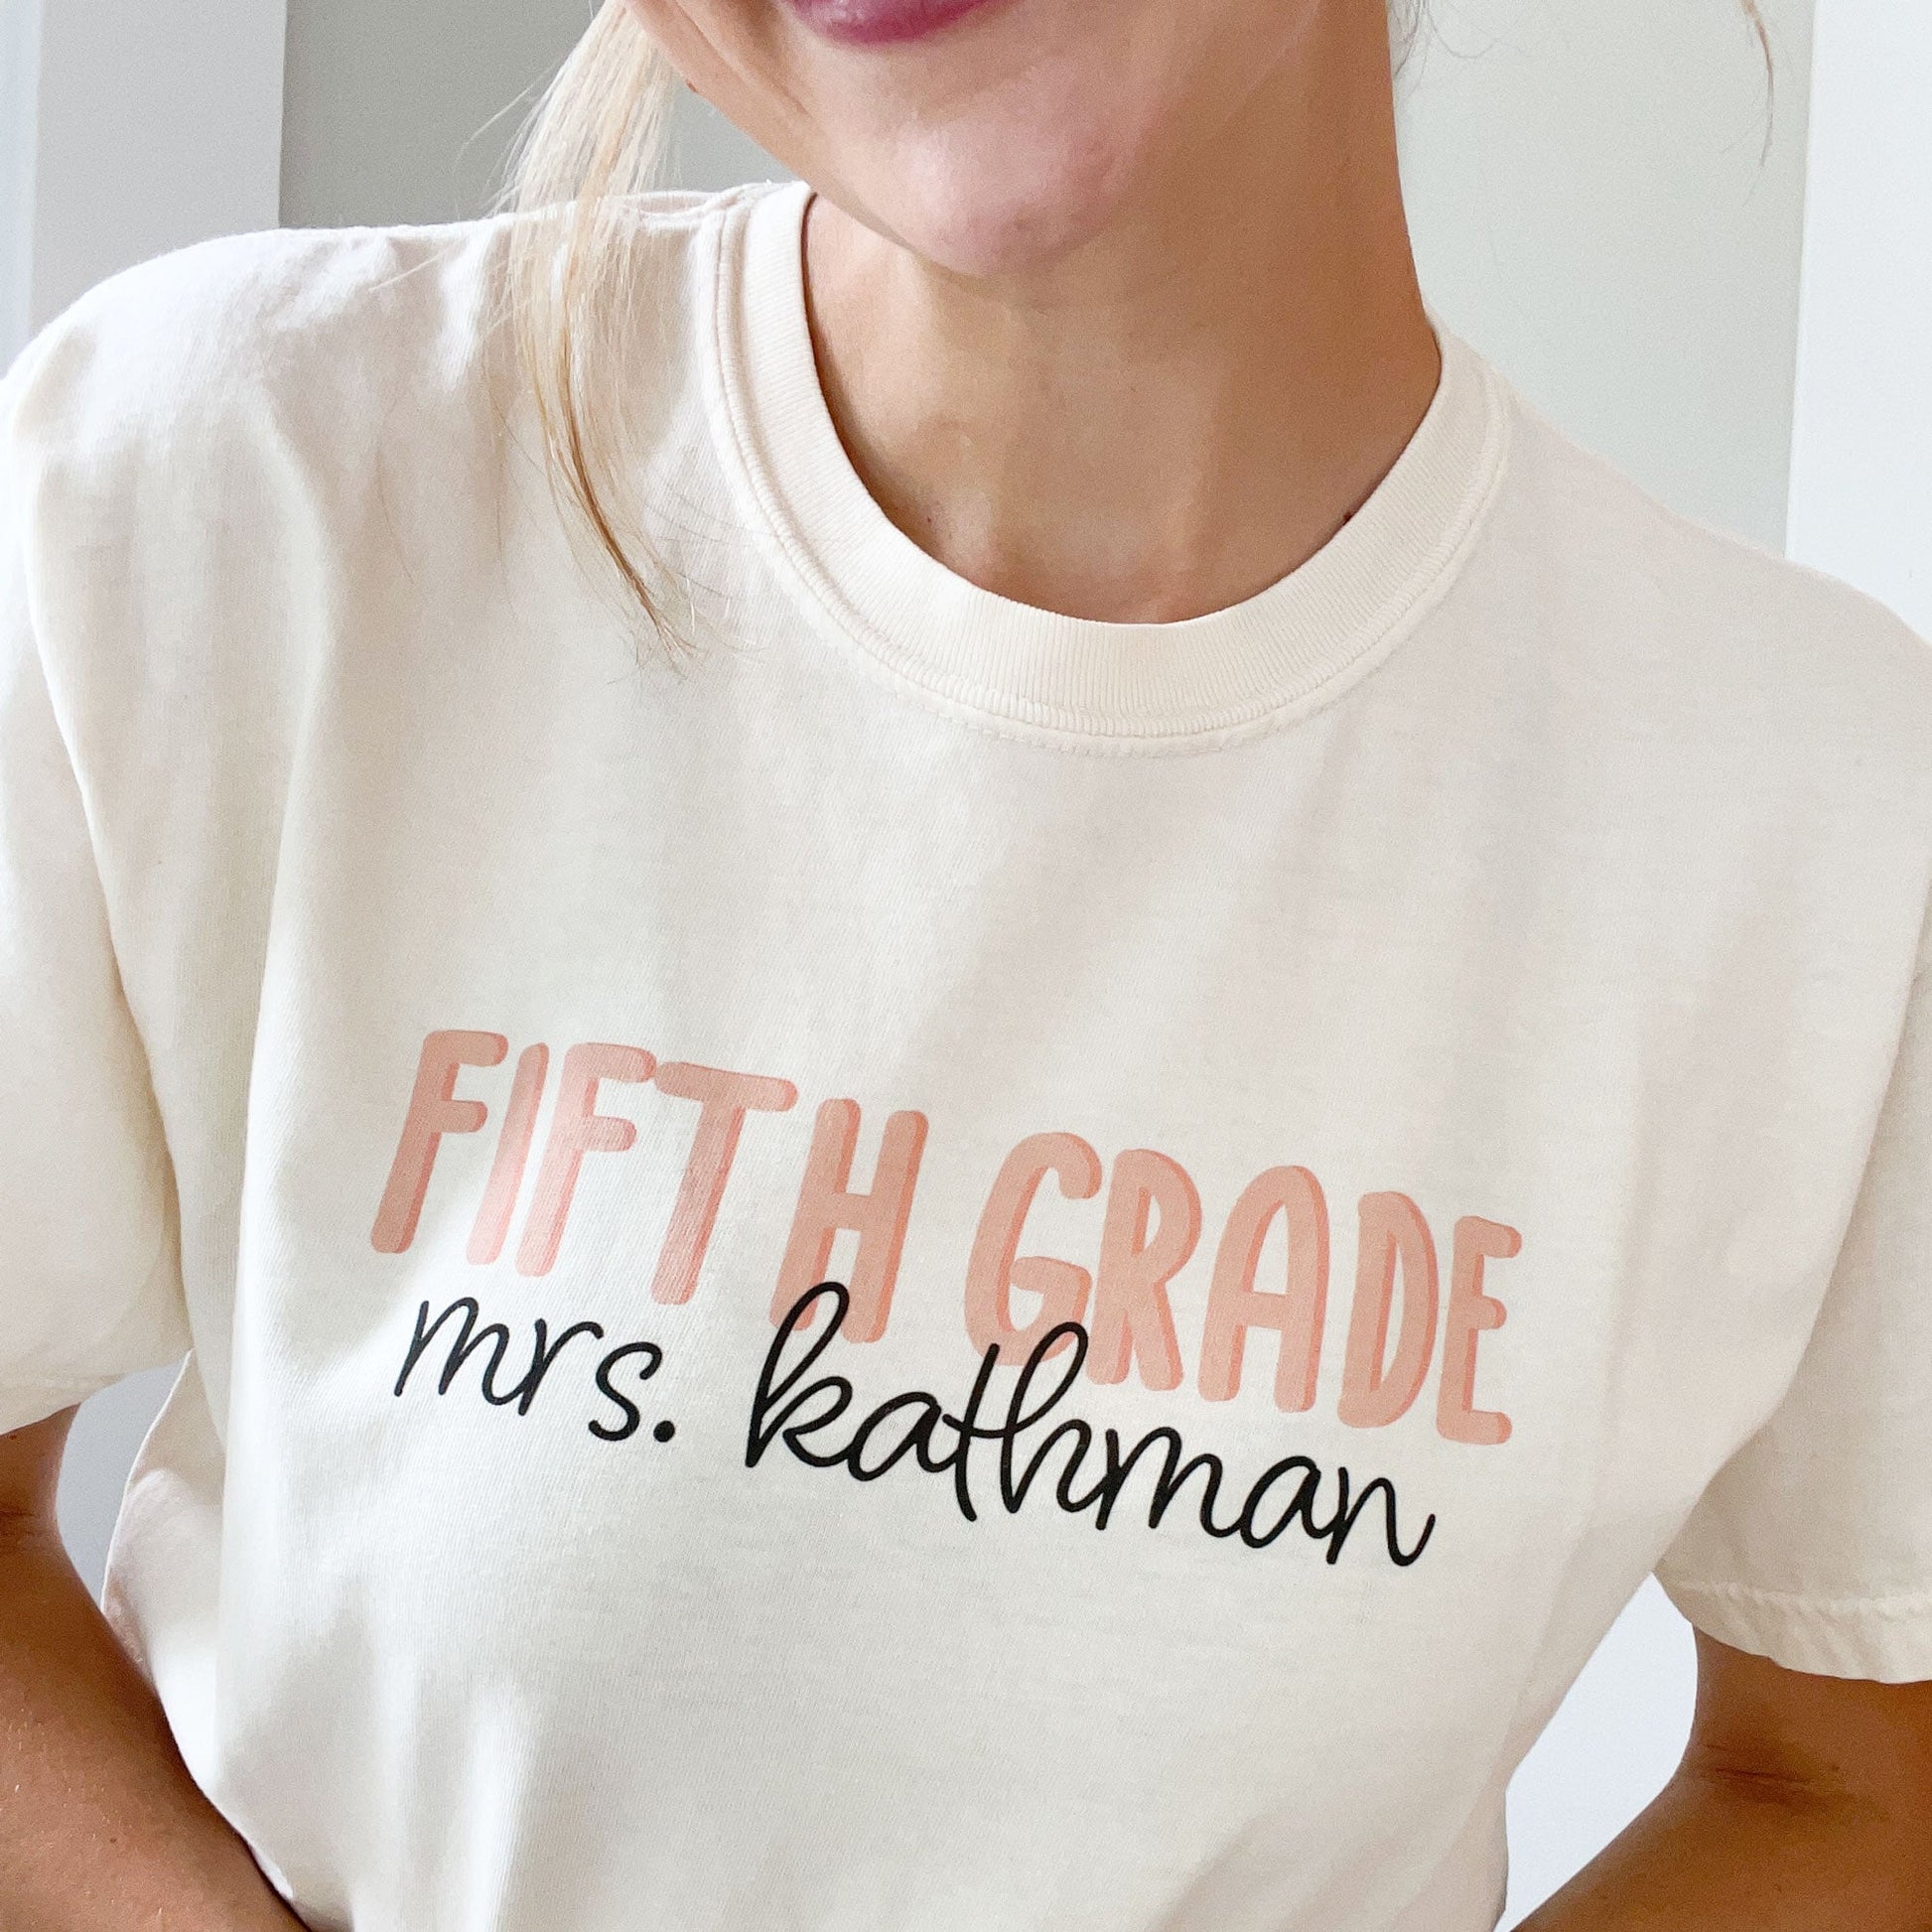 woman wearing an ivory comfort colors t-shirt with a custom grade level and name printed design across the chest